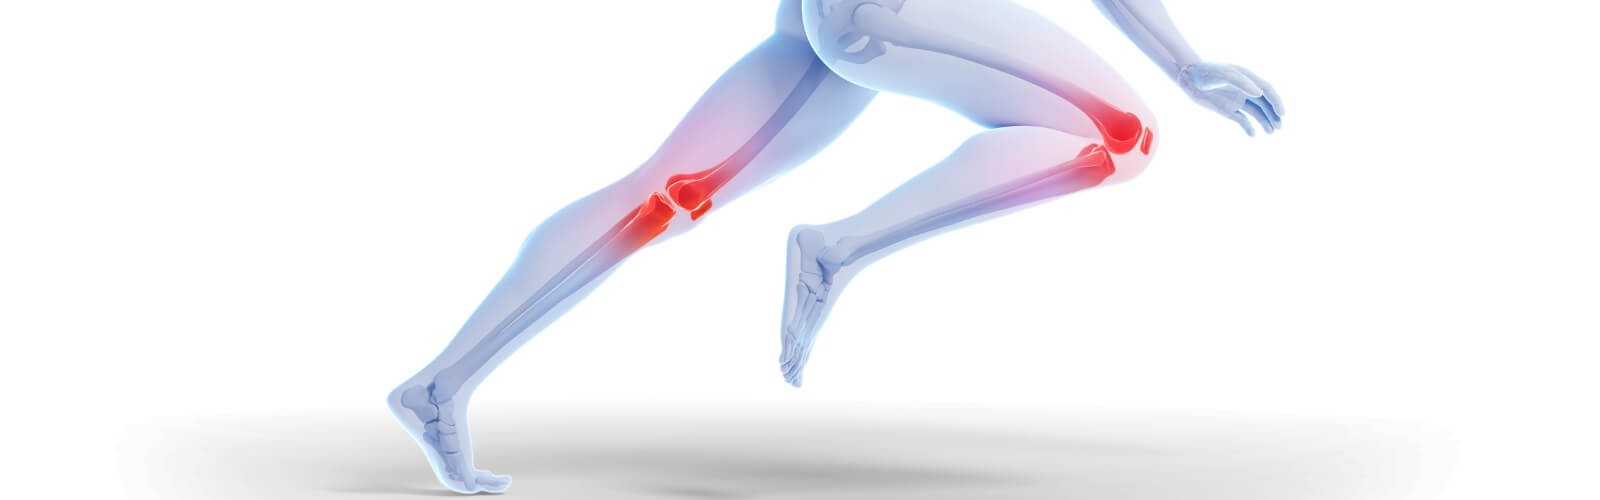 Exercises for knee pain: A Key to Managing Knee Osteoarthritis